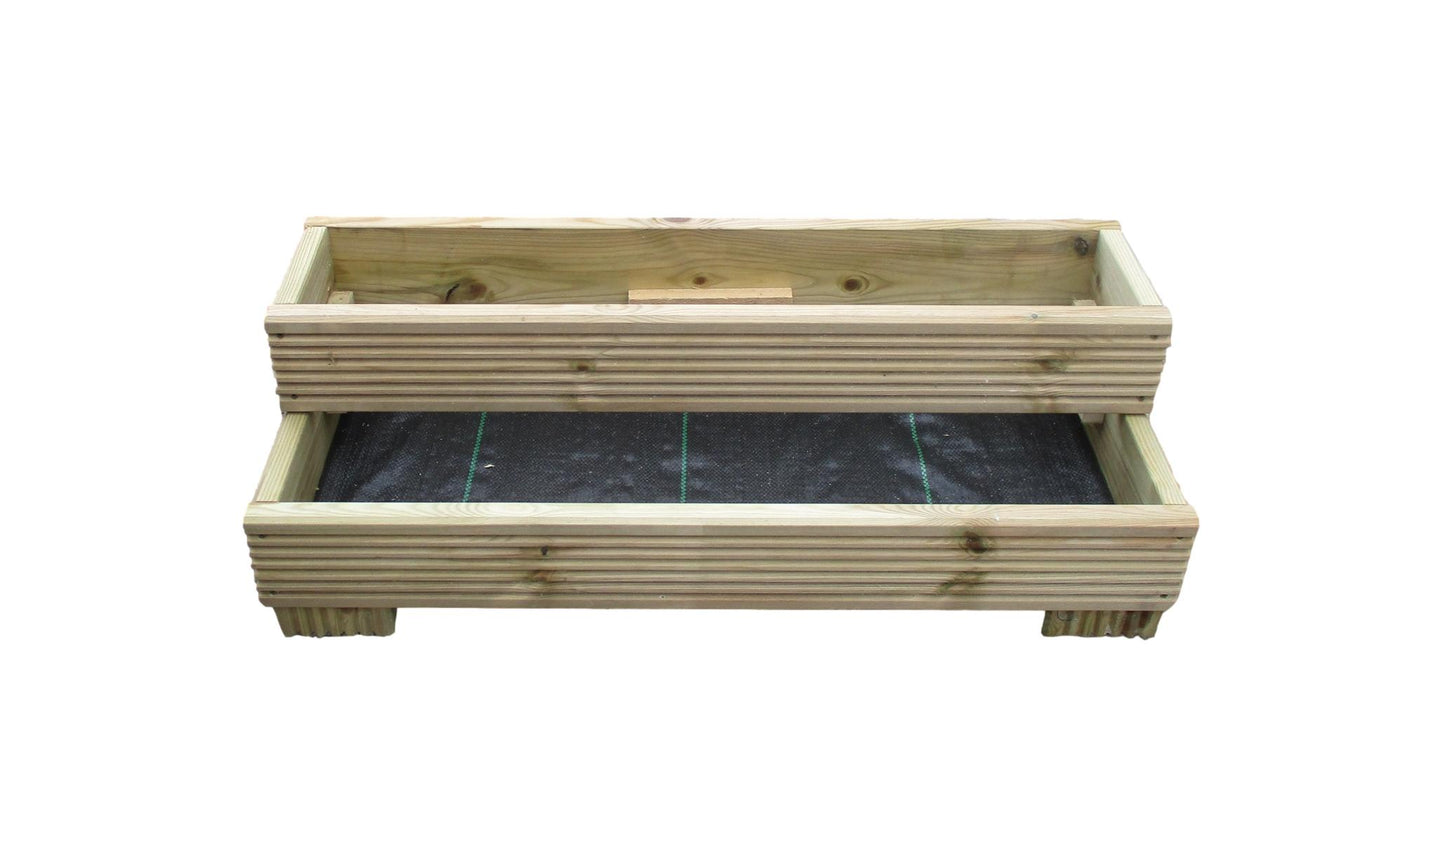 Handmade X-Large Decking Planter 2 Tier Ethically Sourced Wood